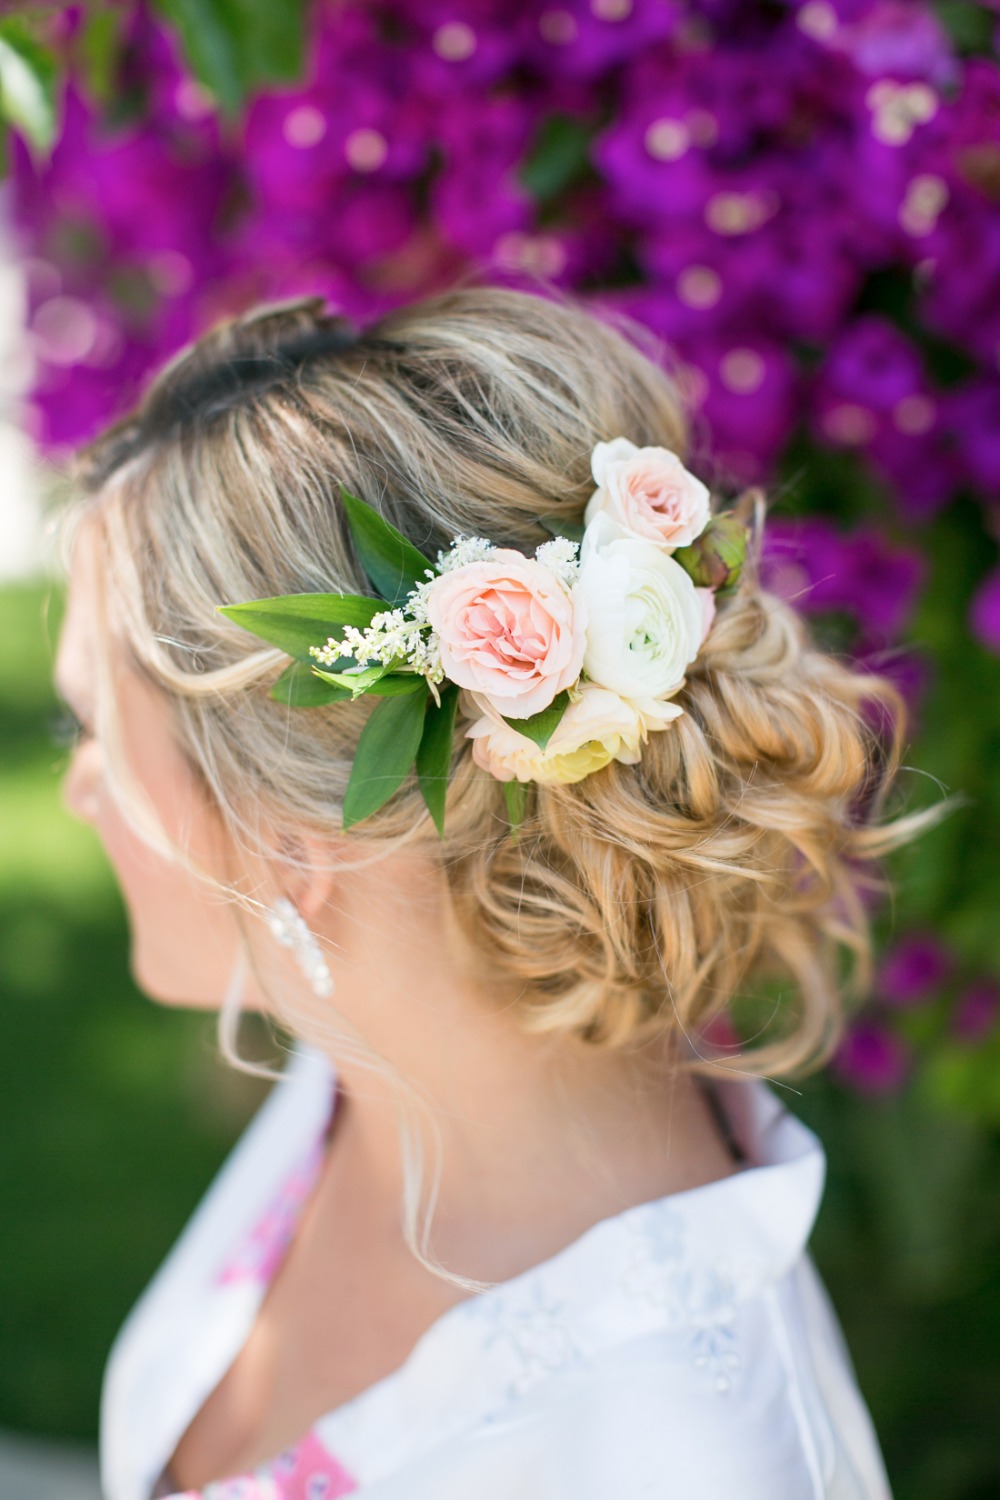 Gorgeous floral hair accessory